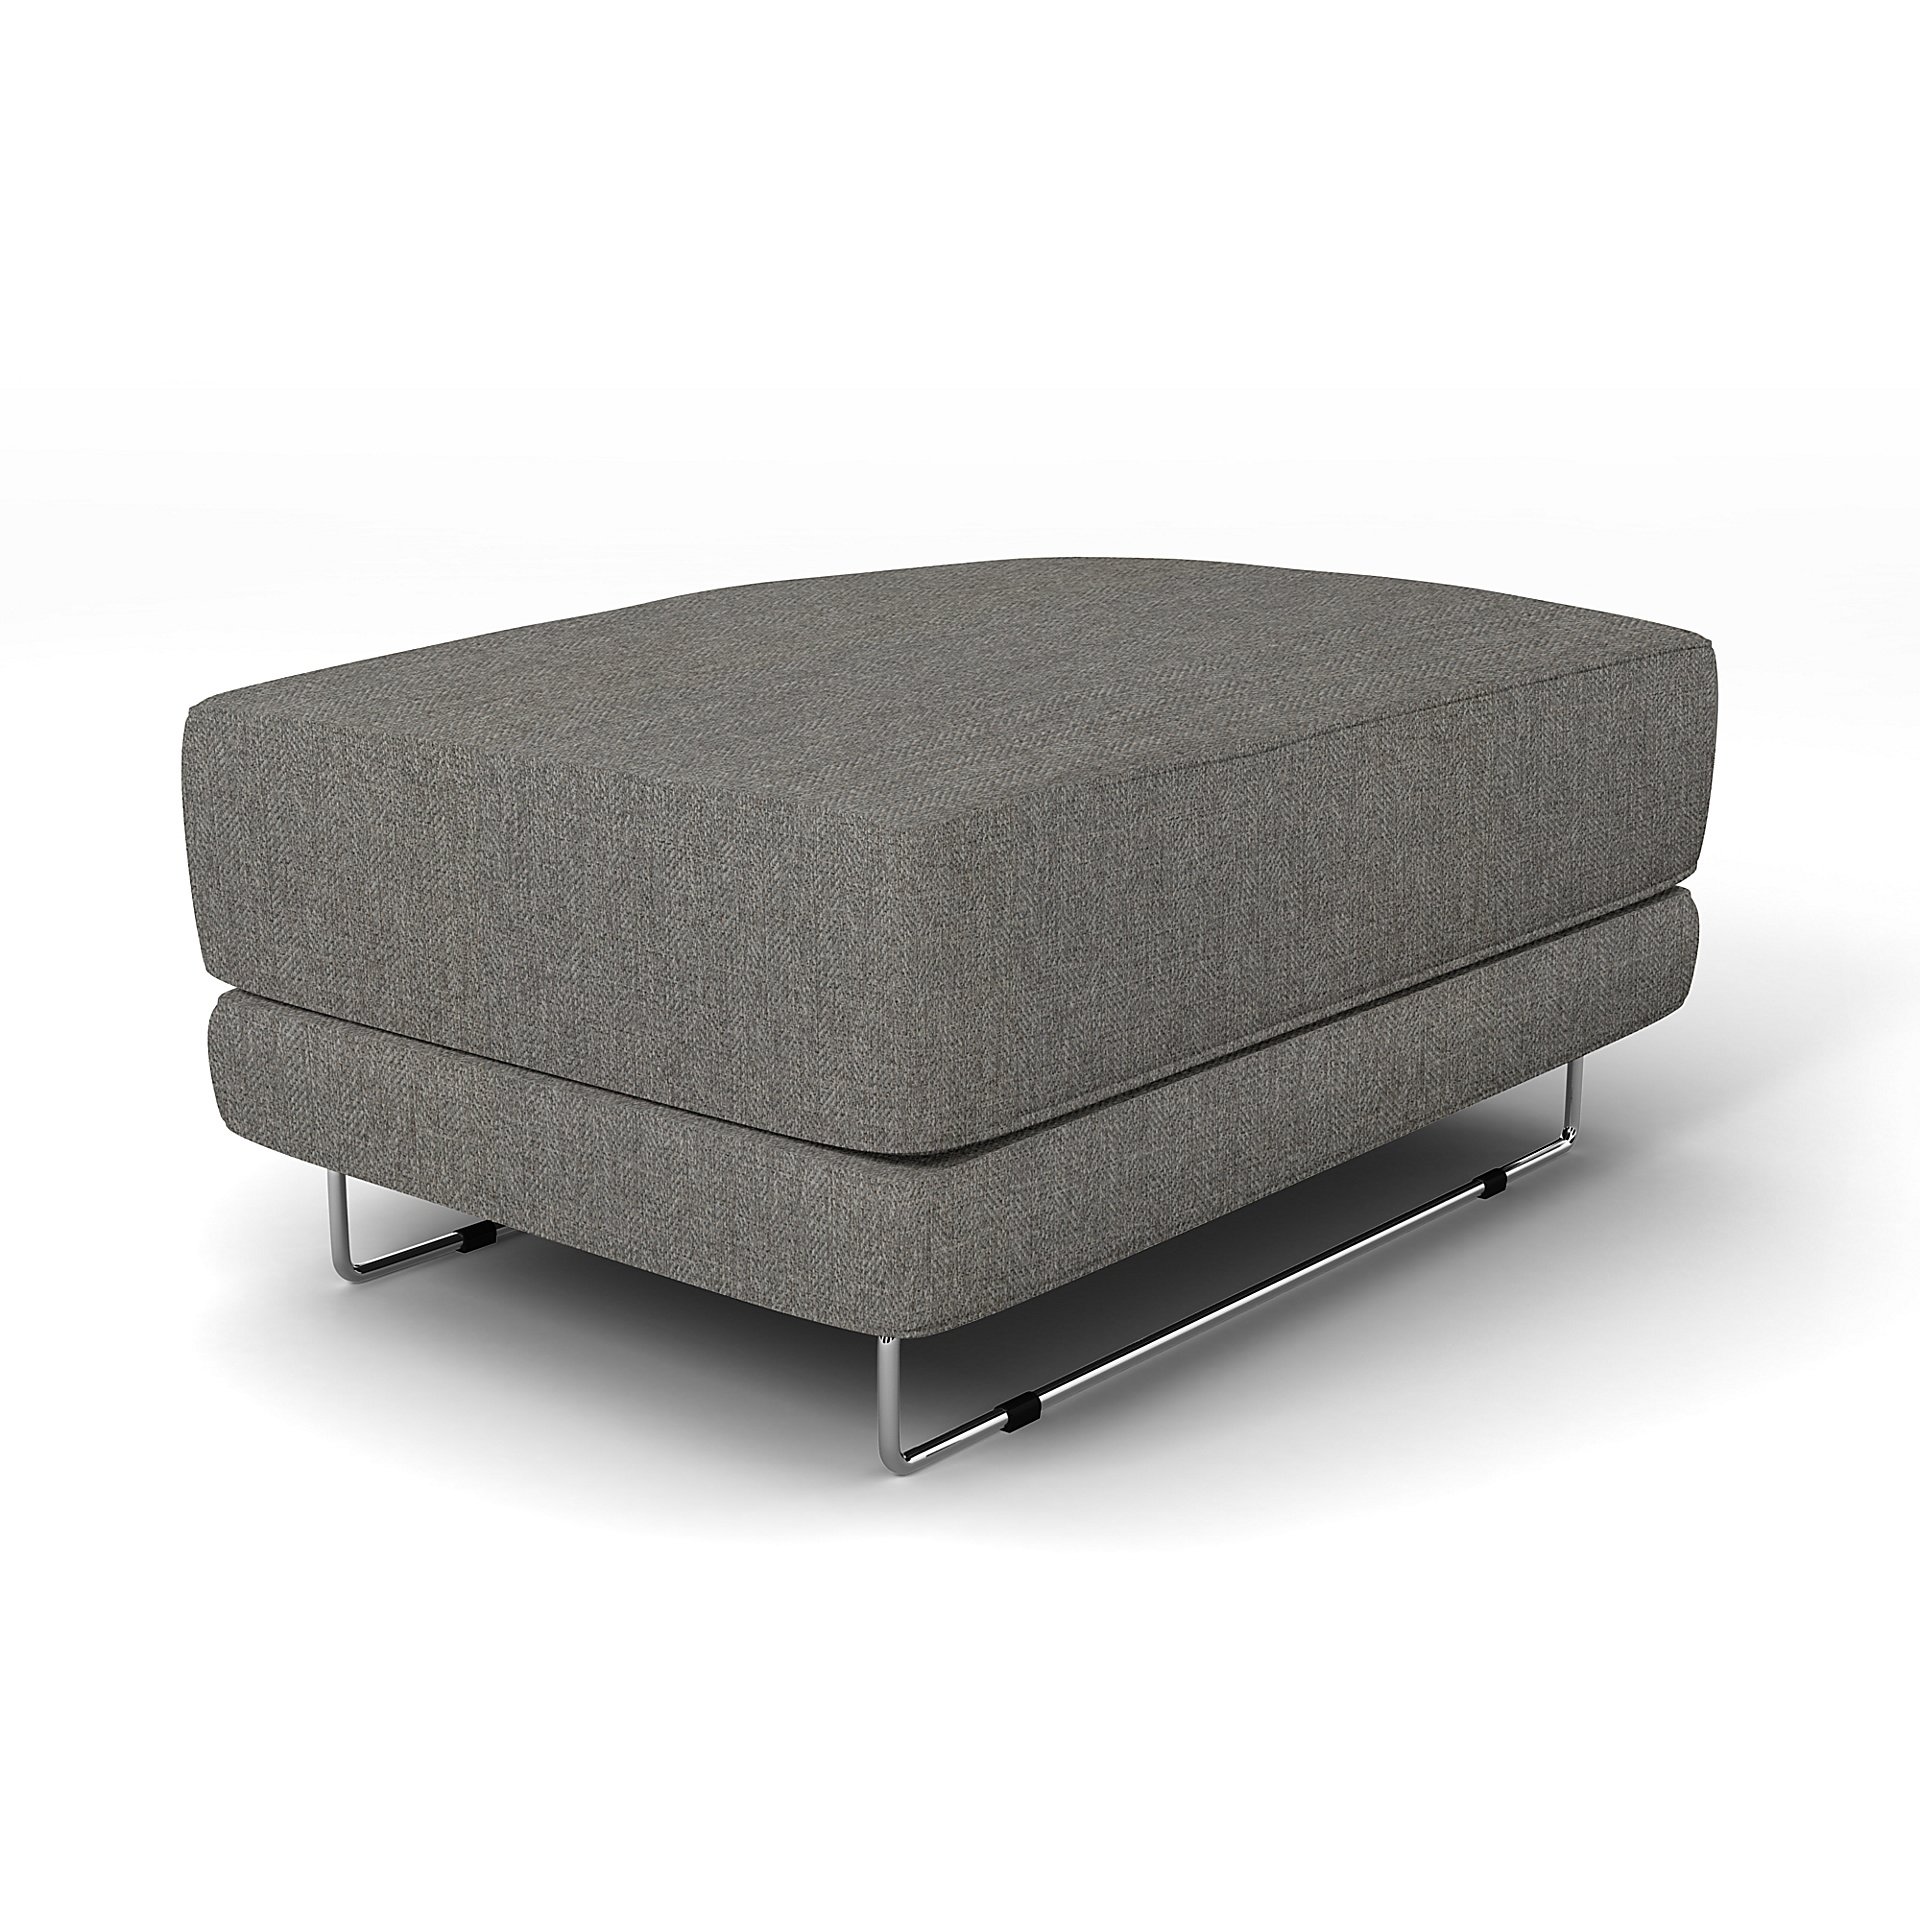 IKEA - Tylosand Footstool Cover, Taupe, Boucle & Texture - Bemz